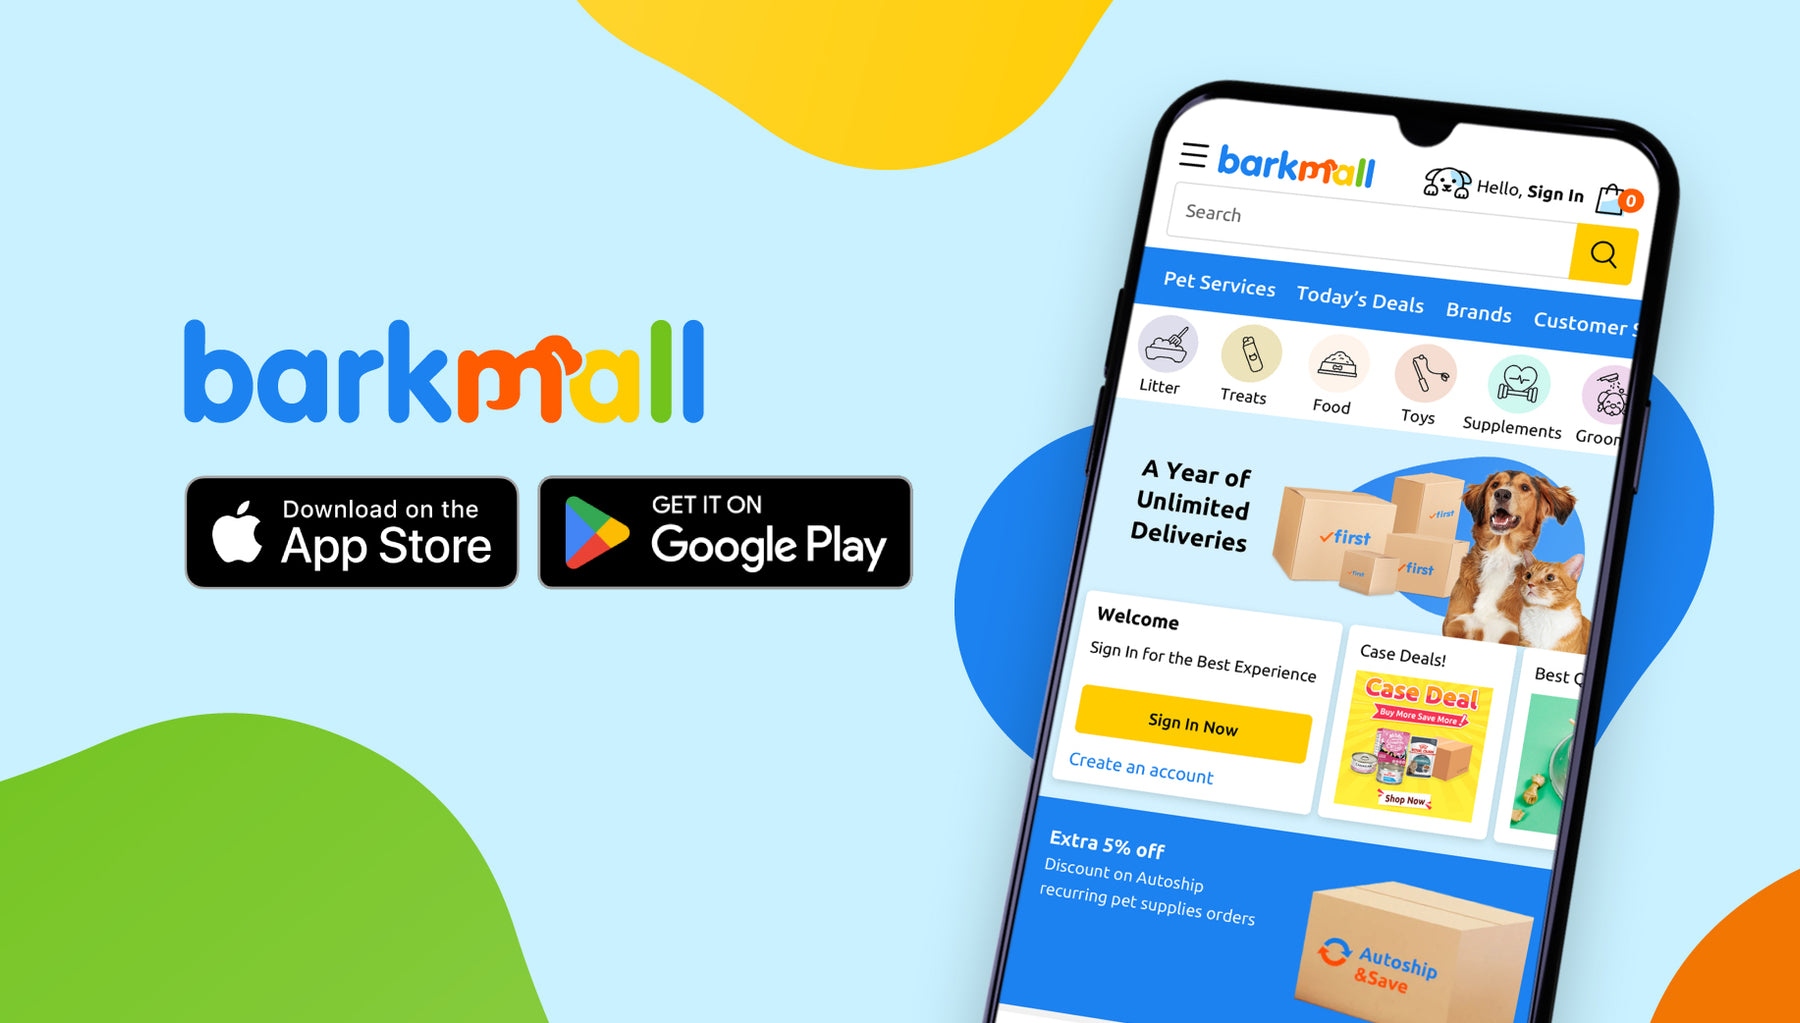 Tap into a better shopping experience with the Barkmall App!